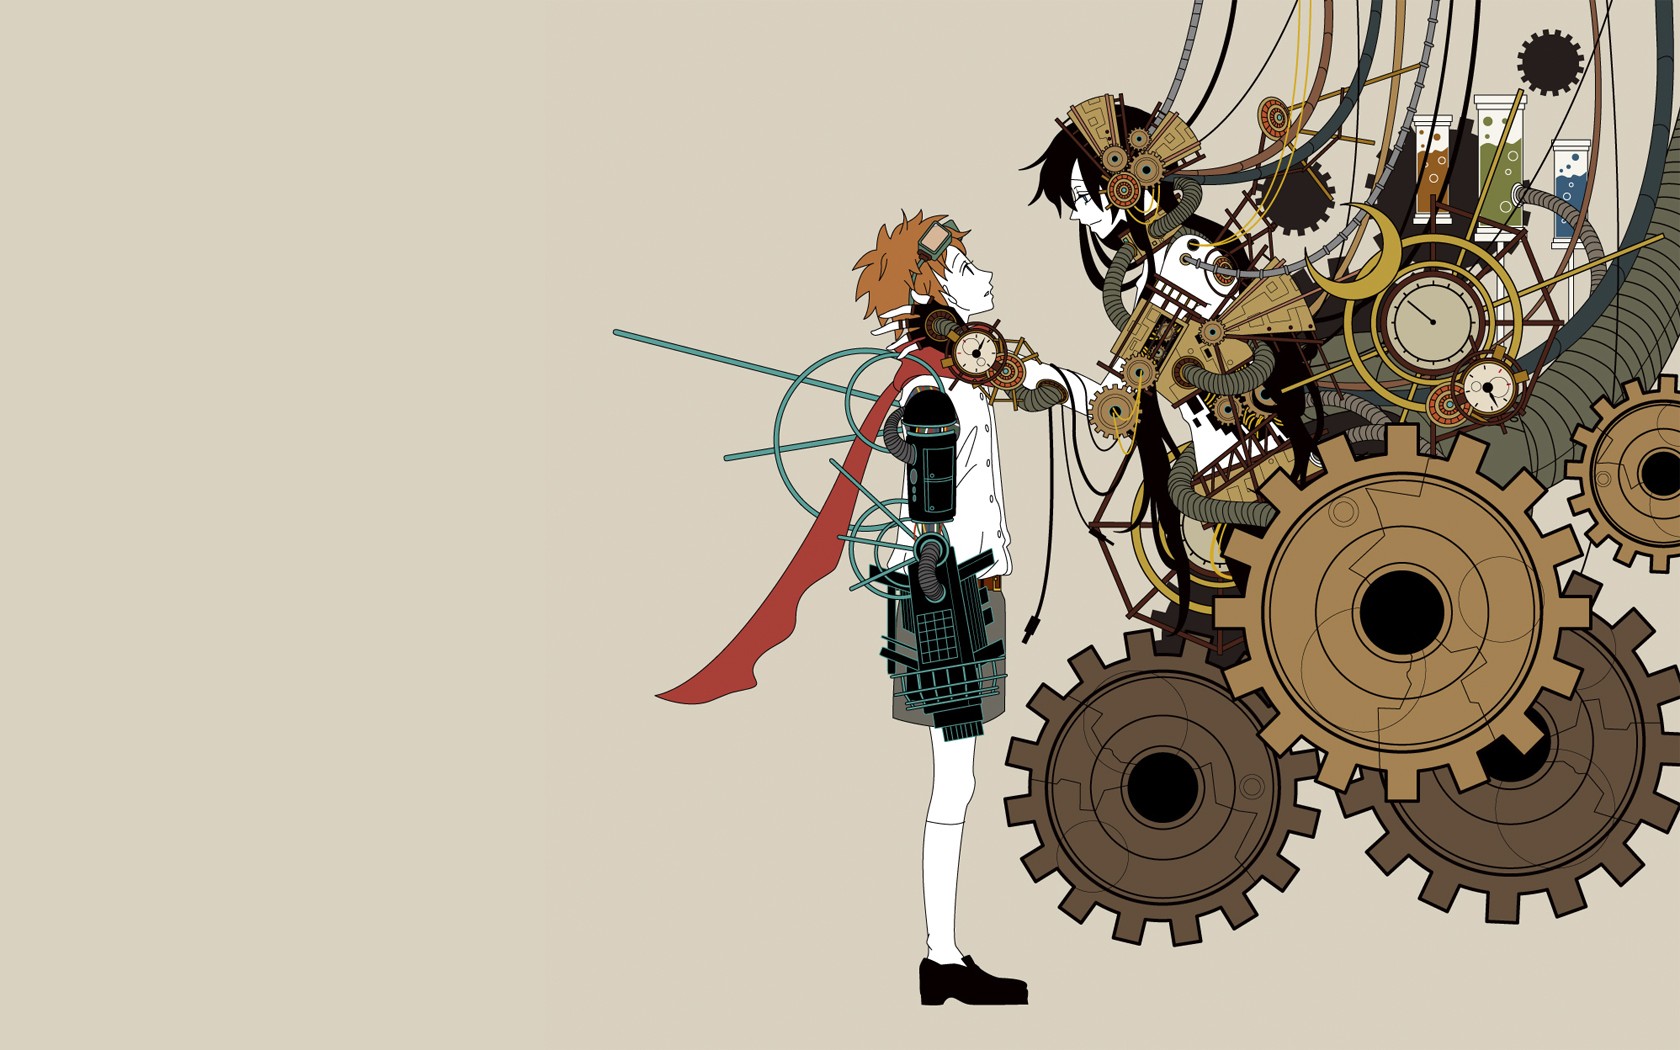 Most popular tags for this image include: anime, steampunk, anime guy,  otome game and abraham van helsing | Steampunk characters, Steampunk anime,  Cute anime guys